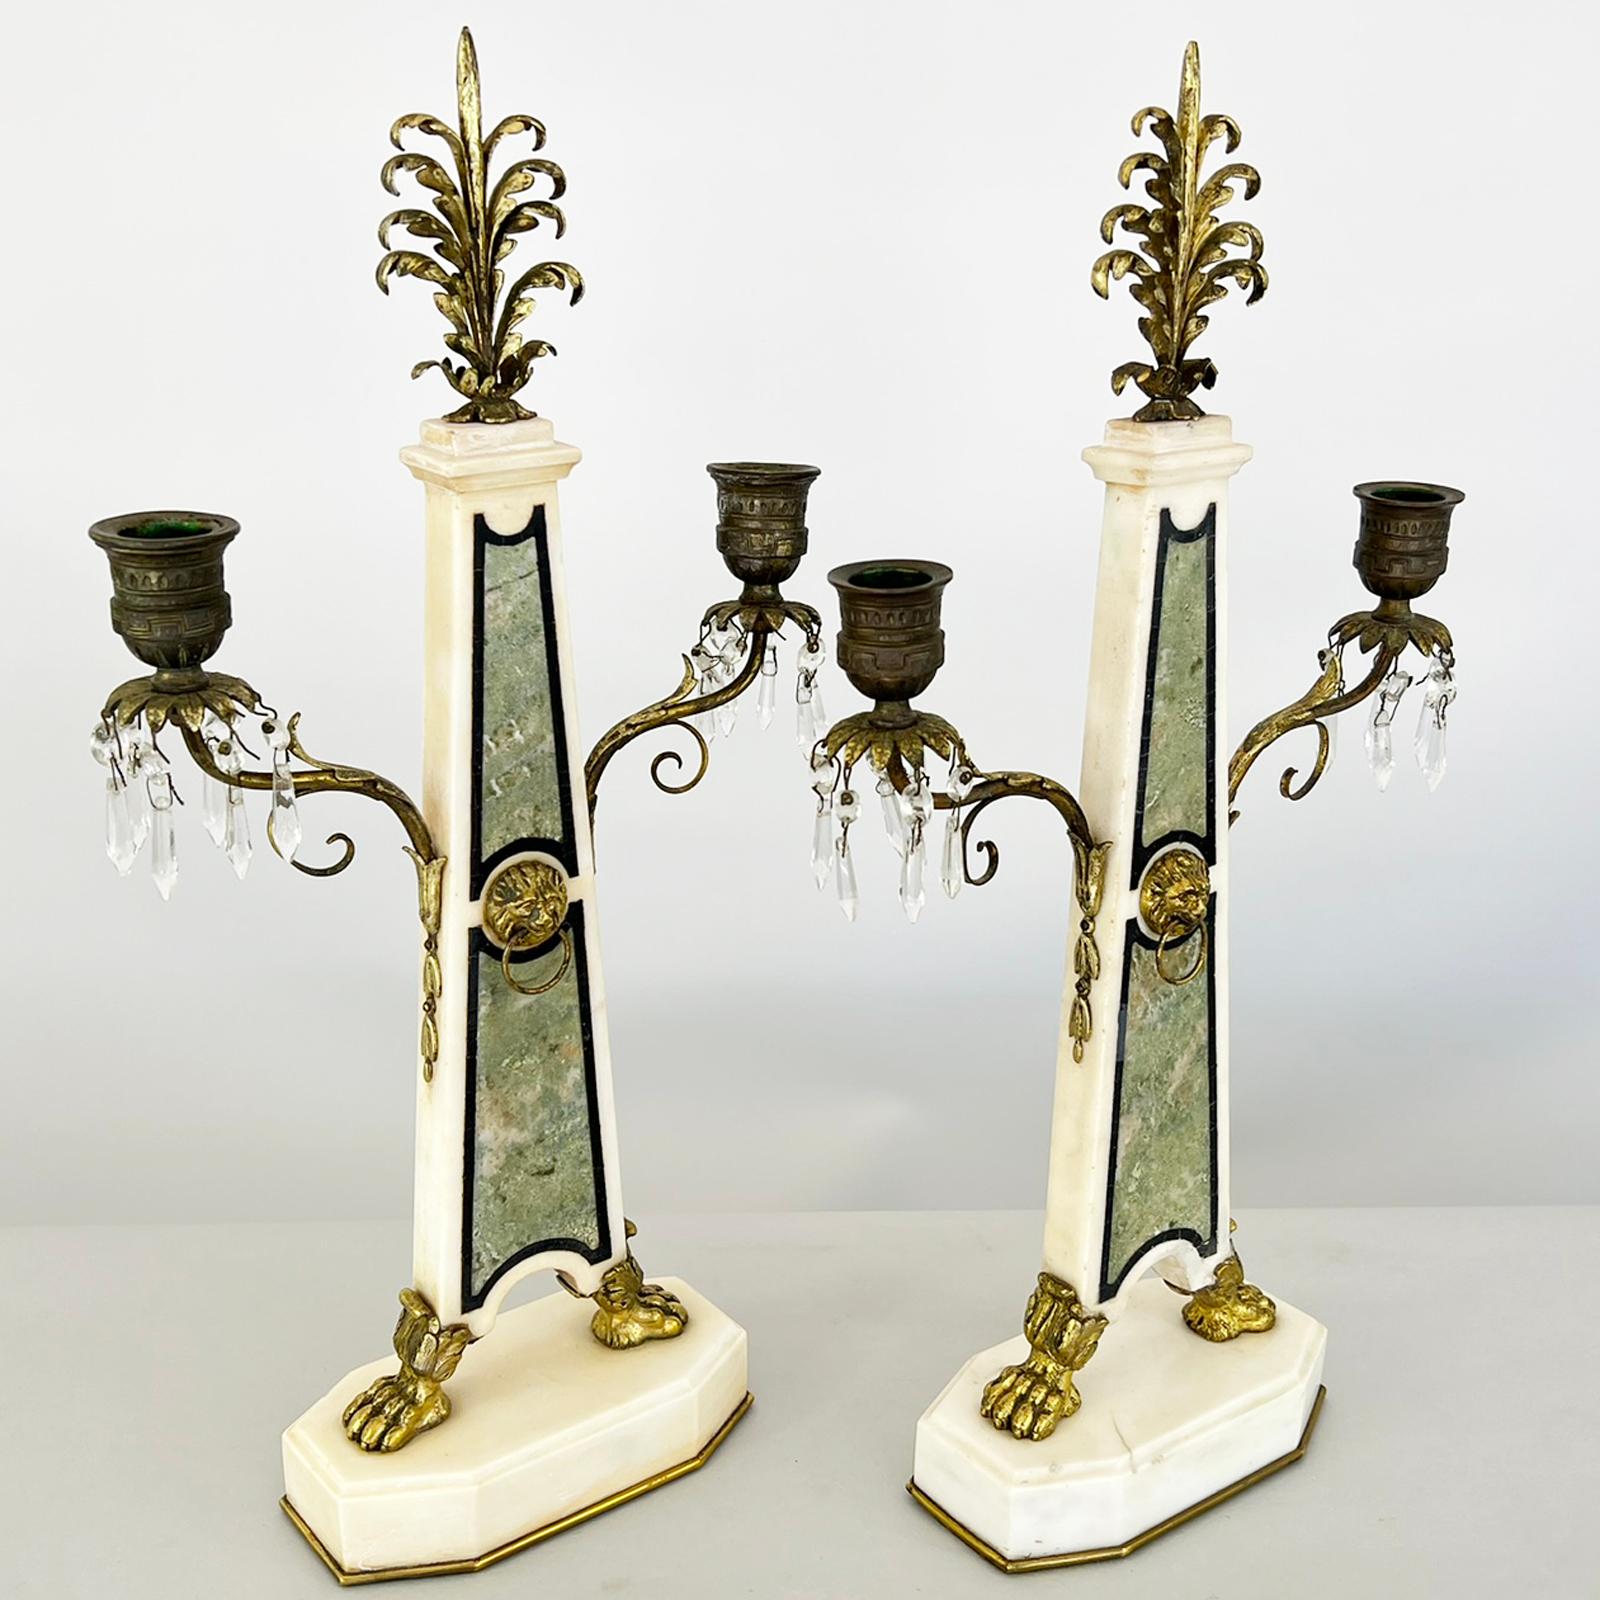 Pair of 19th Century Napoleon III Inlaid Marble Mantle Girondoles In Good Condition For Sale In West Palm Beach, FL